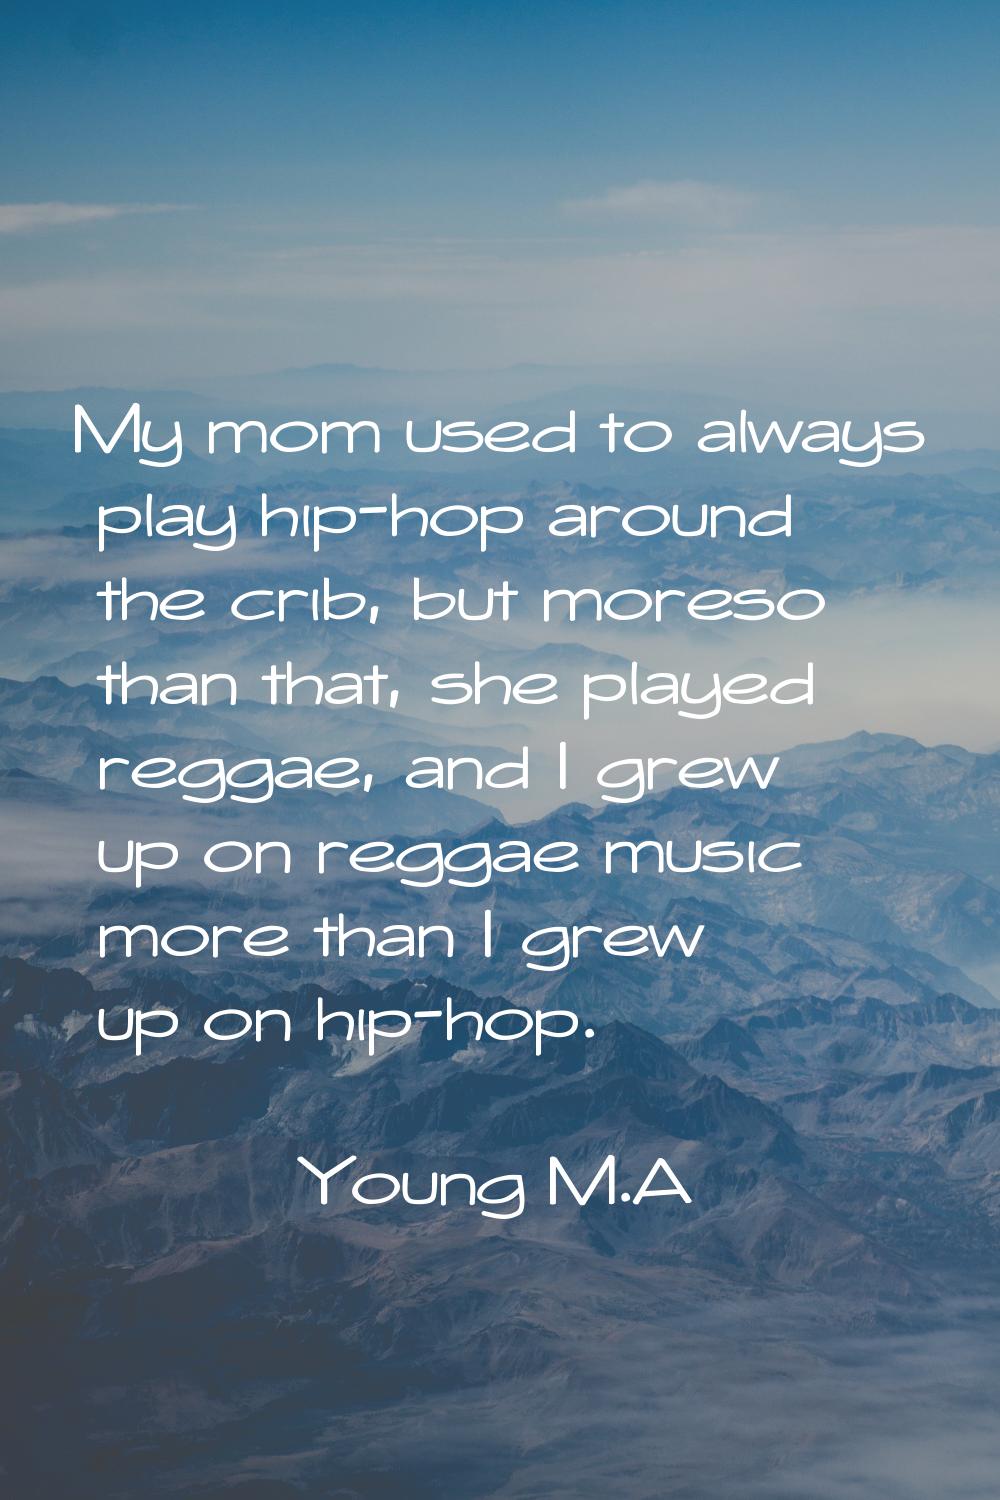 My mom used to always play hip-hop around the crib, but moreso than that, she played reggae, and I 